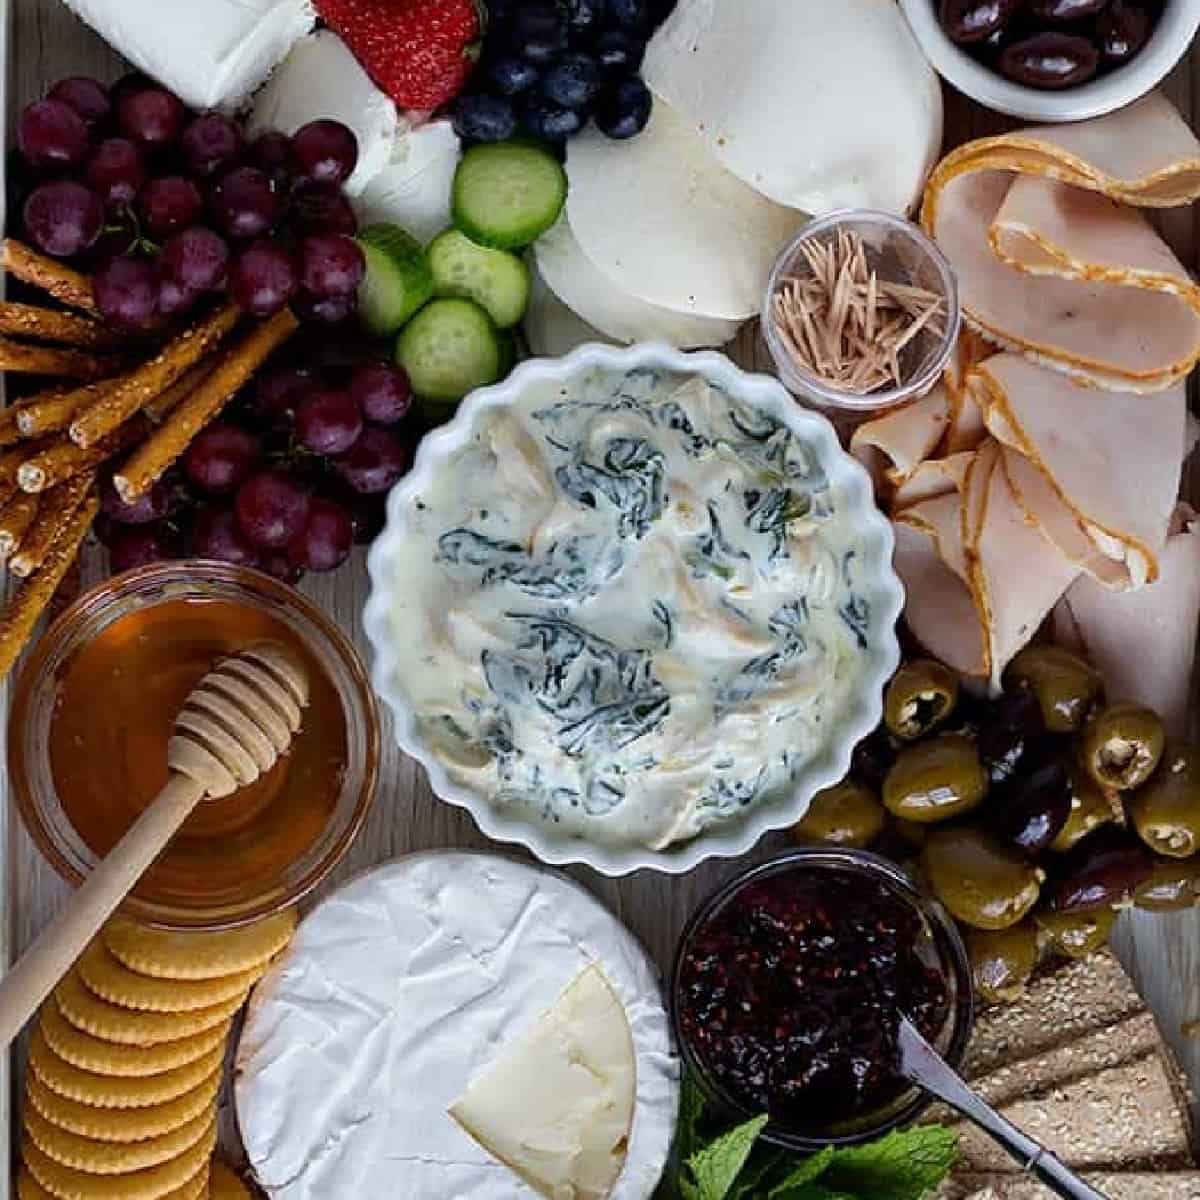 This cold spinach artichoke dip is a great addition to any summer charcuterie board. Make this bright and tasty cheese board for all your summer parties! 
